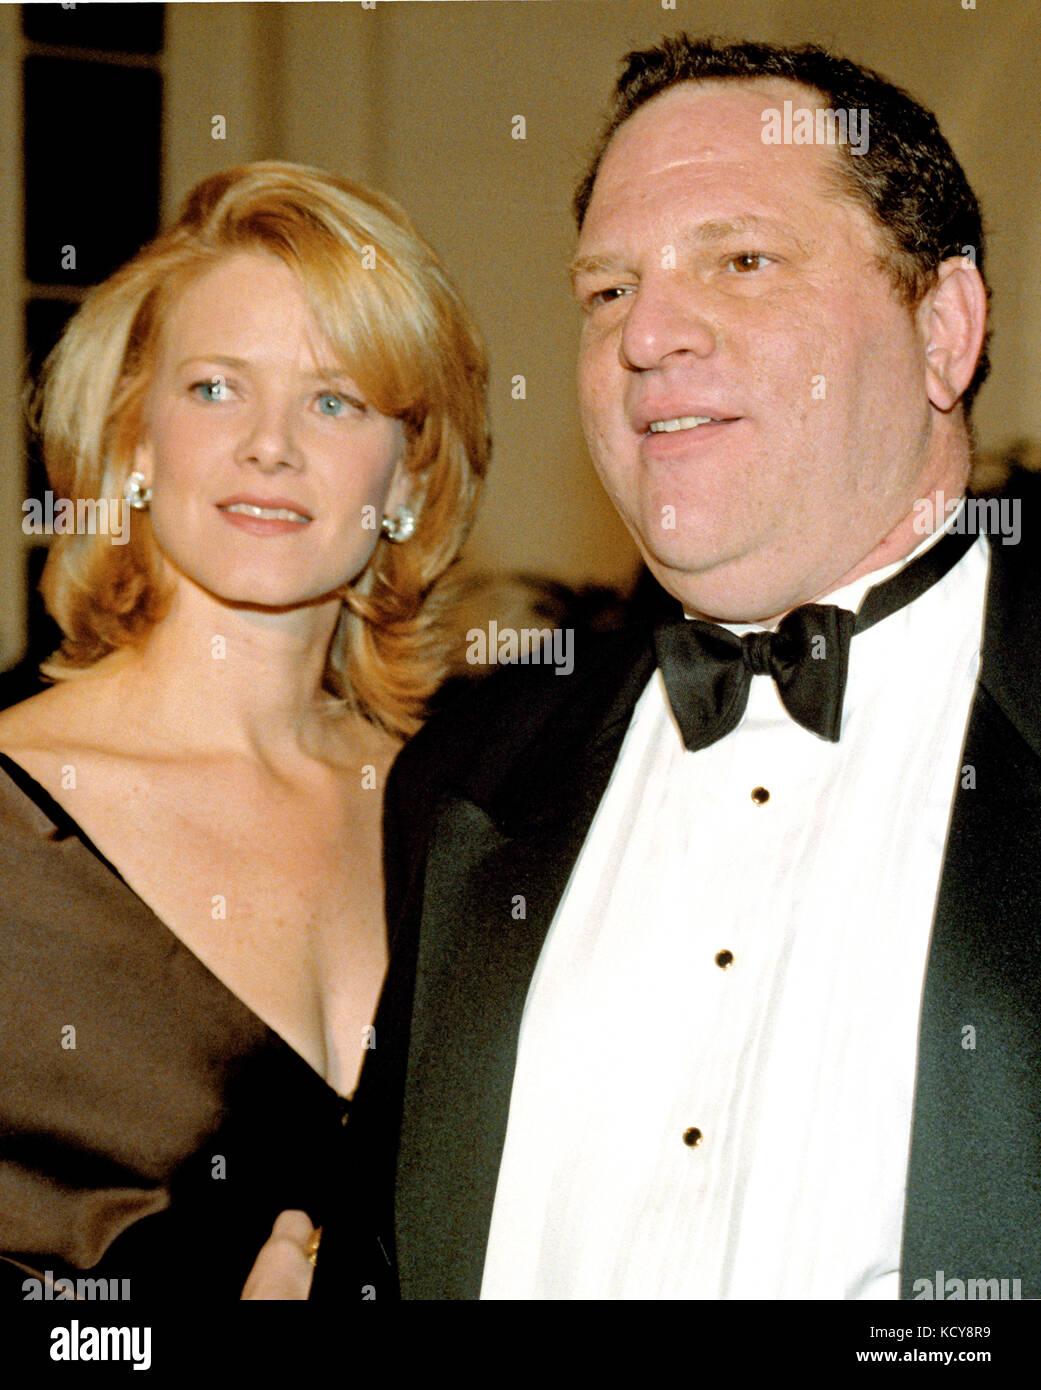 miramax-films-co-chairman-harvey-weinstein-and-his-wife-eve-chilton-KCY8R9.jpg